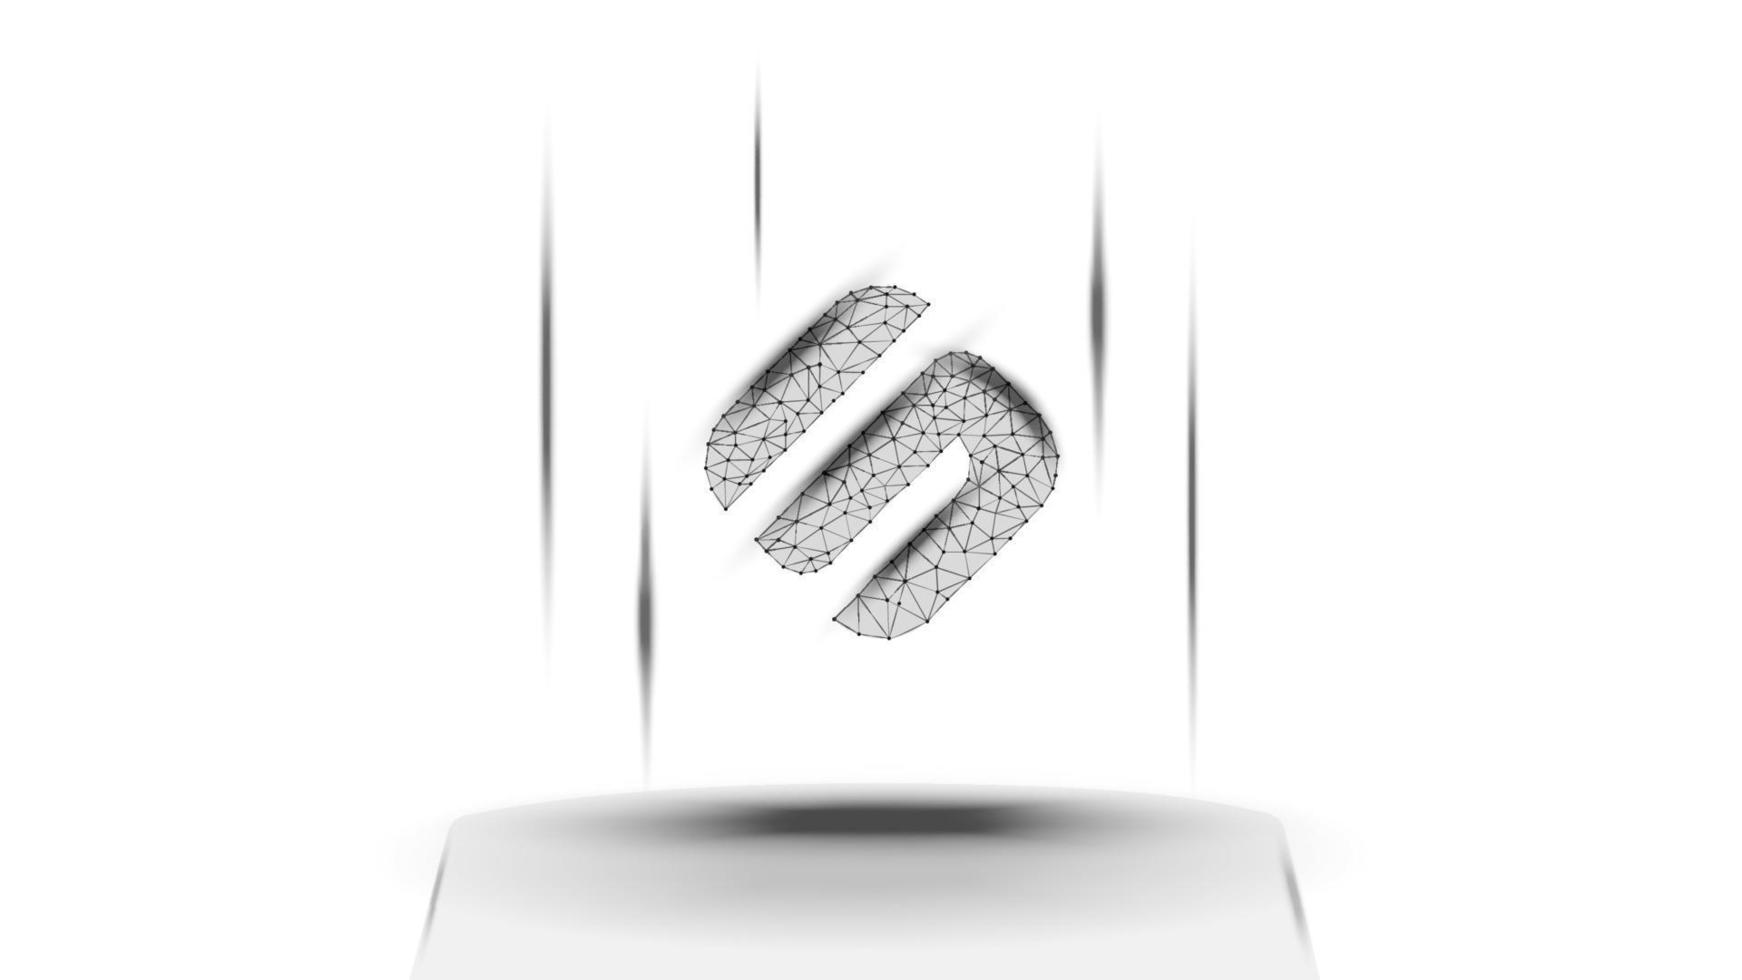 Swipe SXP token symbol of the DeFi system above the pedestal on white background. Cryptocurrency logo icon. Decentralized finance programs. Vector illustration for website or banner.